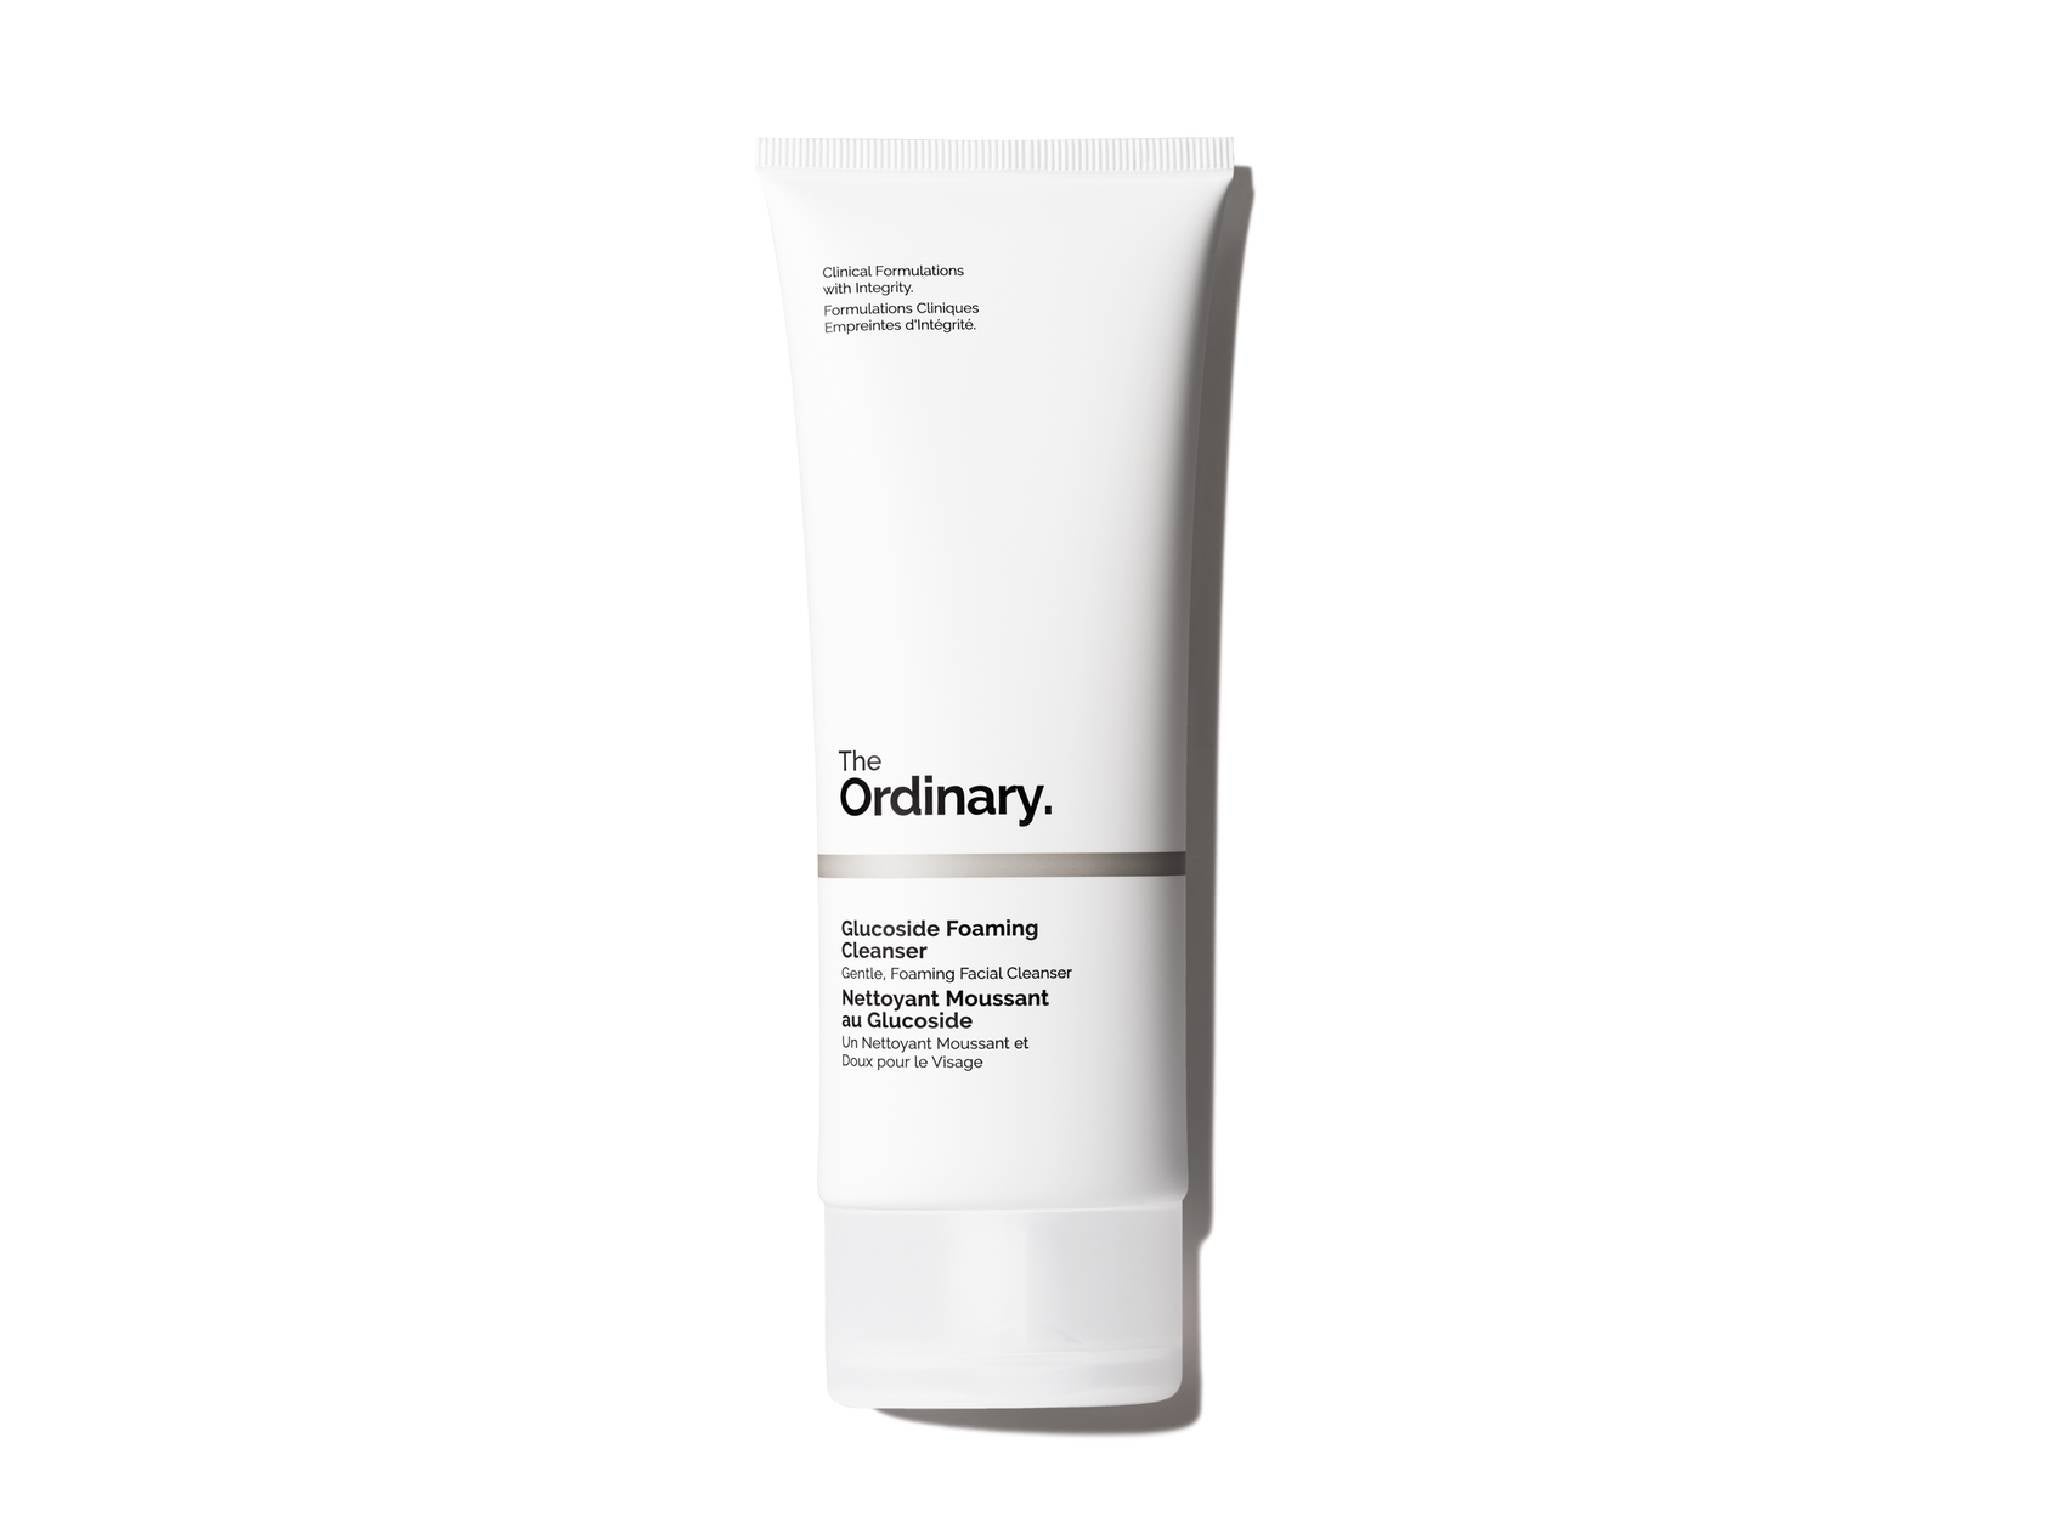 The Ordinary glucoside foaming cleanser